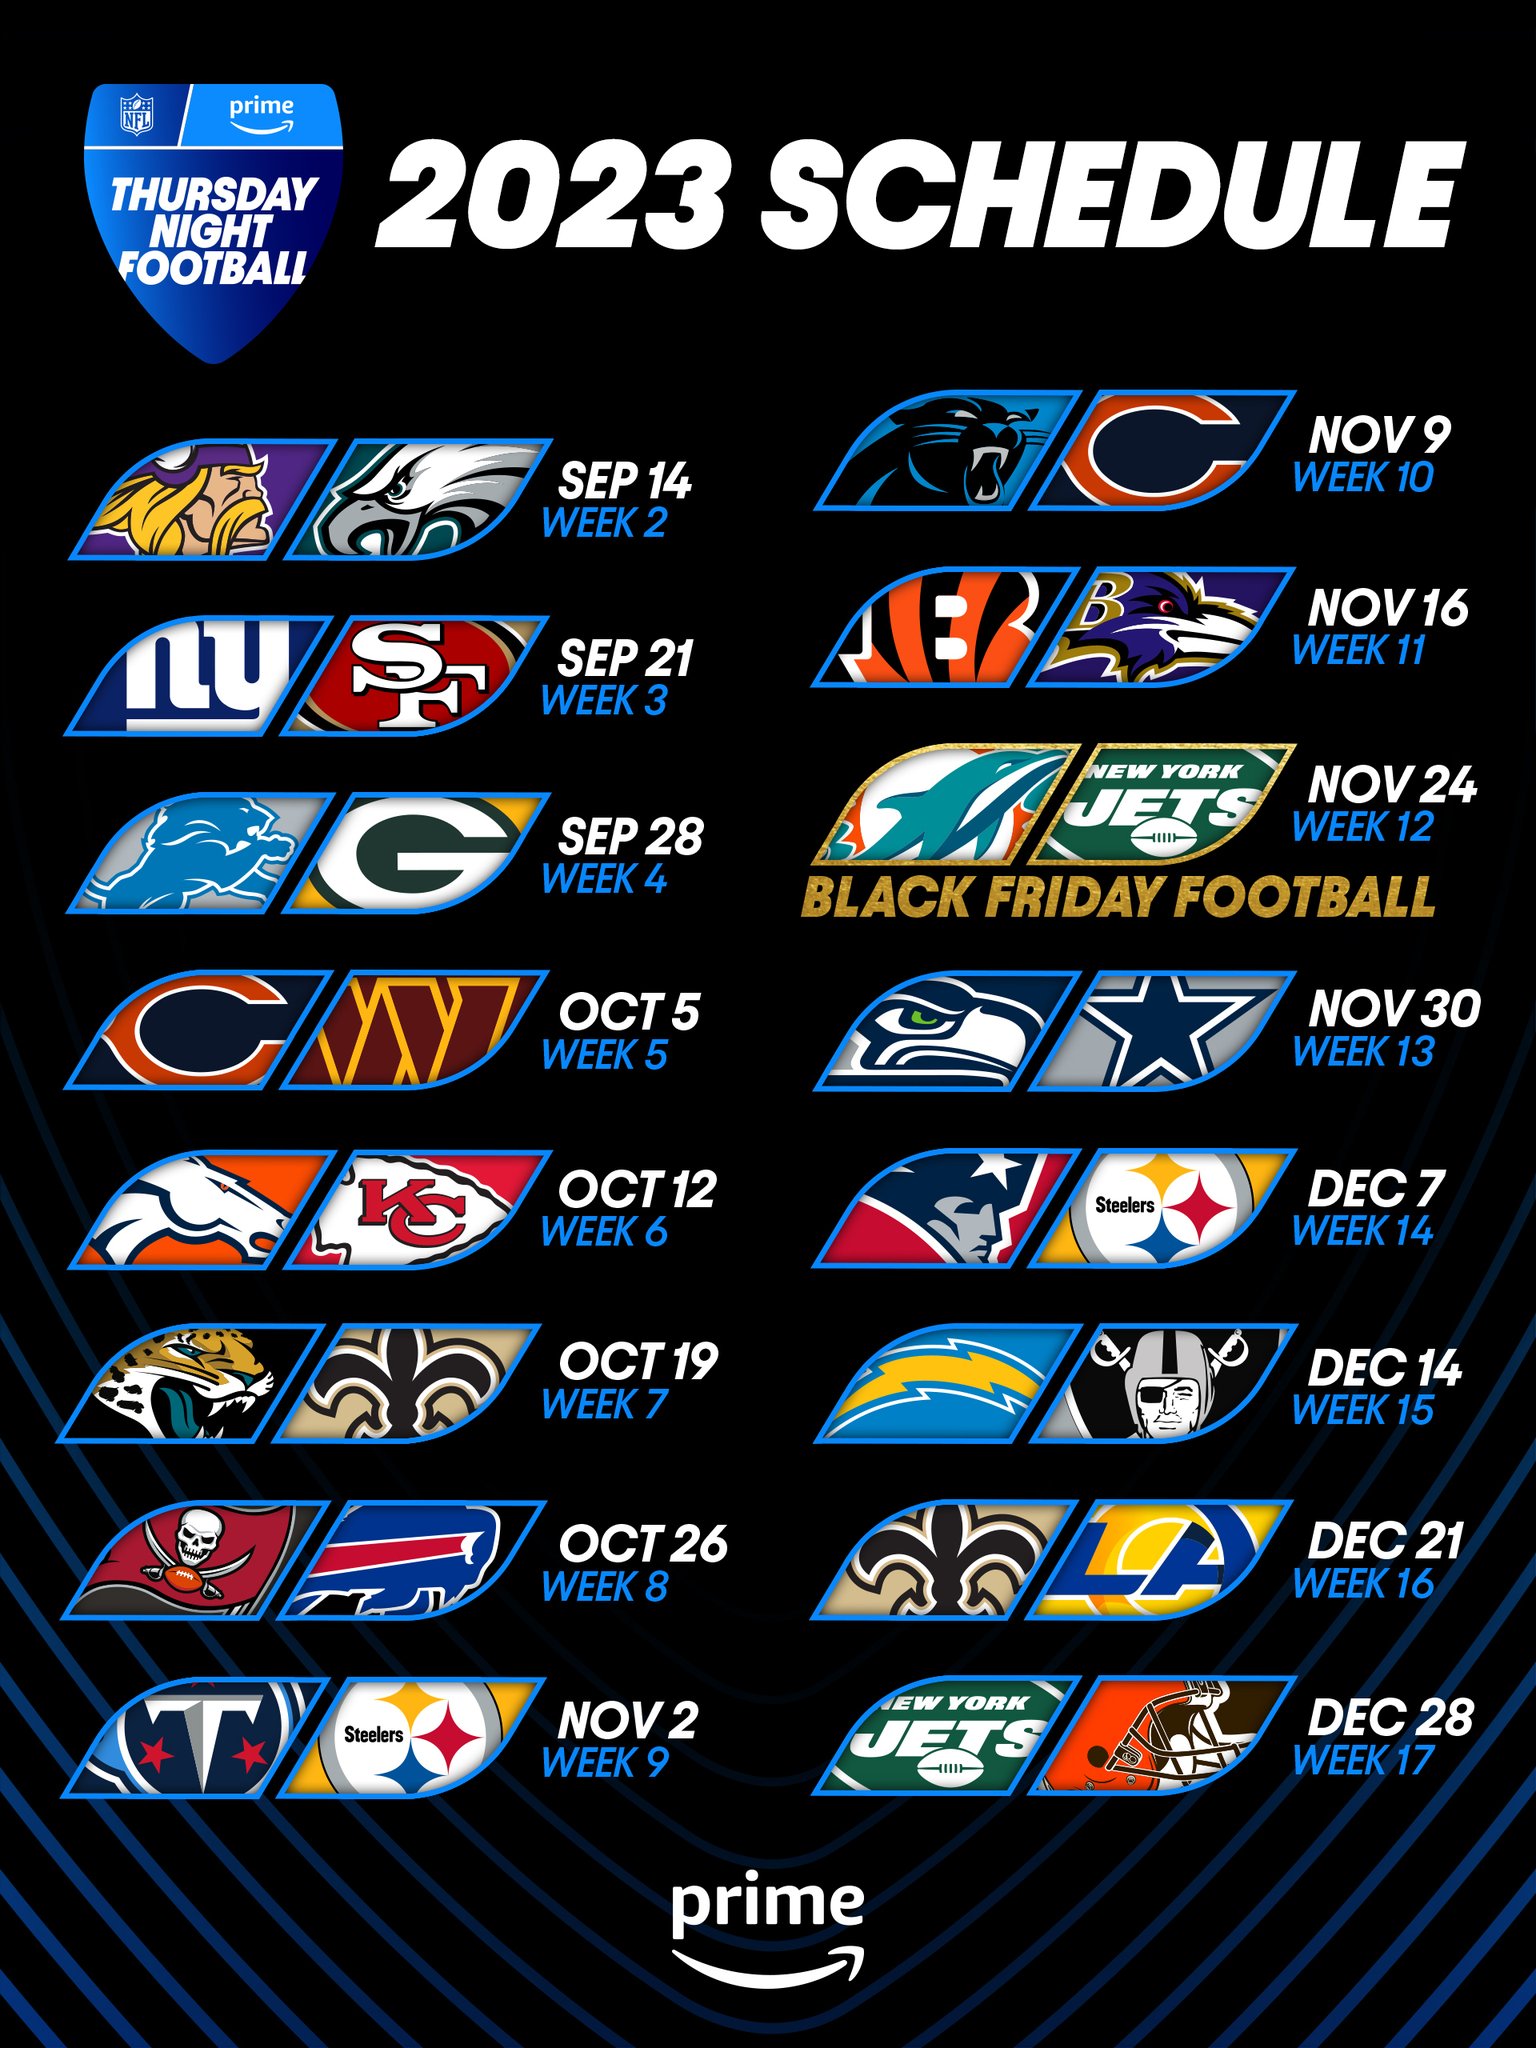 the schedule for thursday night football